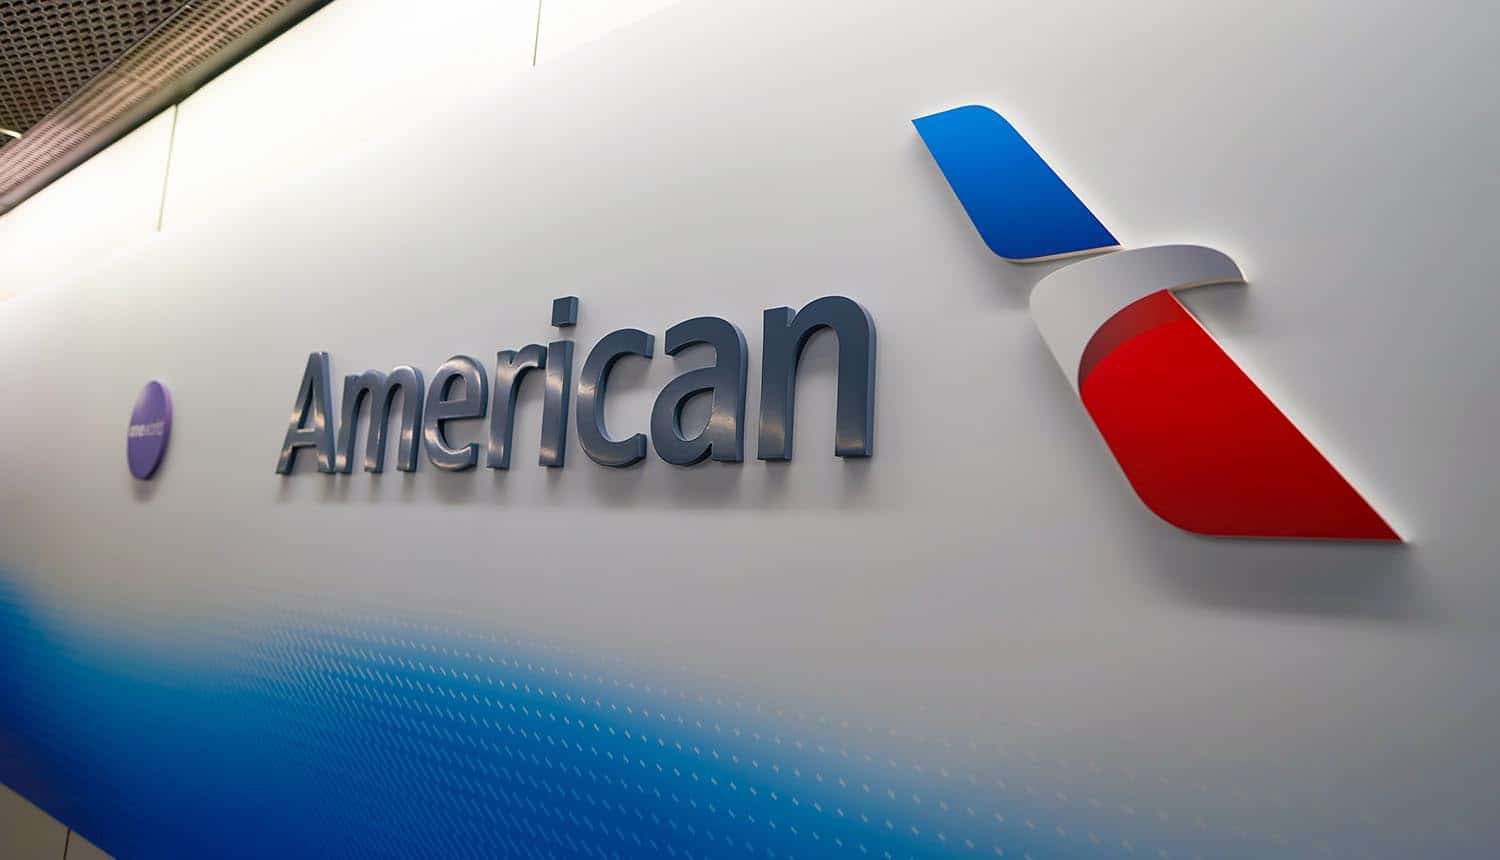 American Airlines Data Breach: What You Need to Know